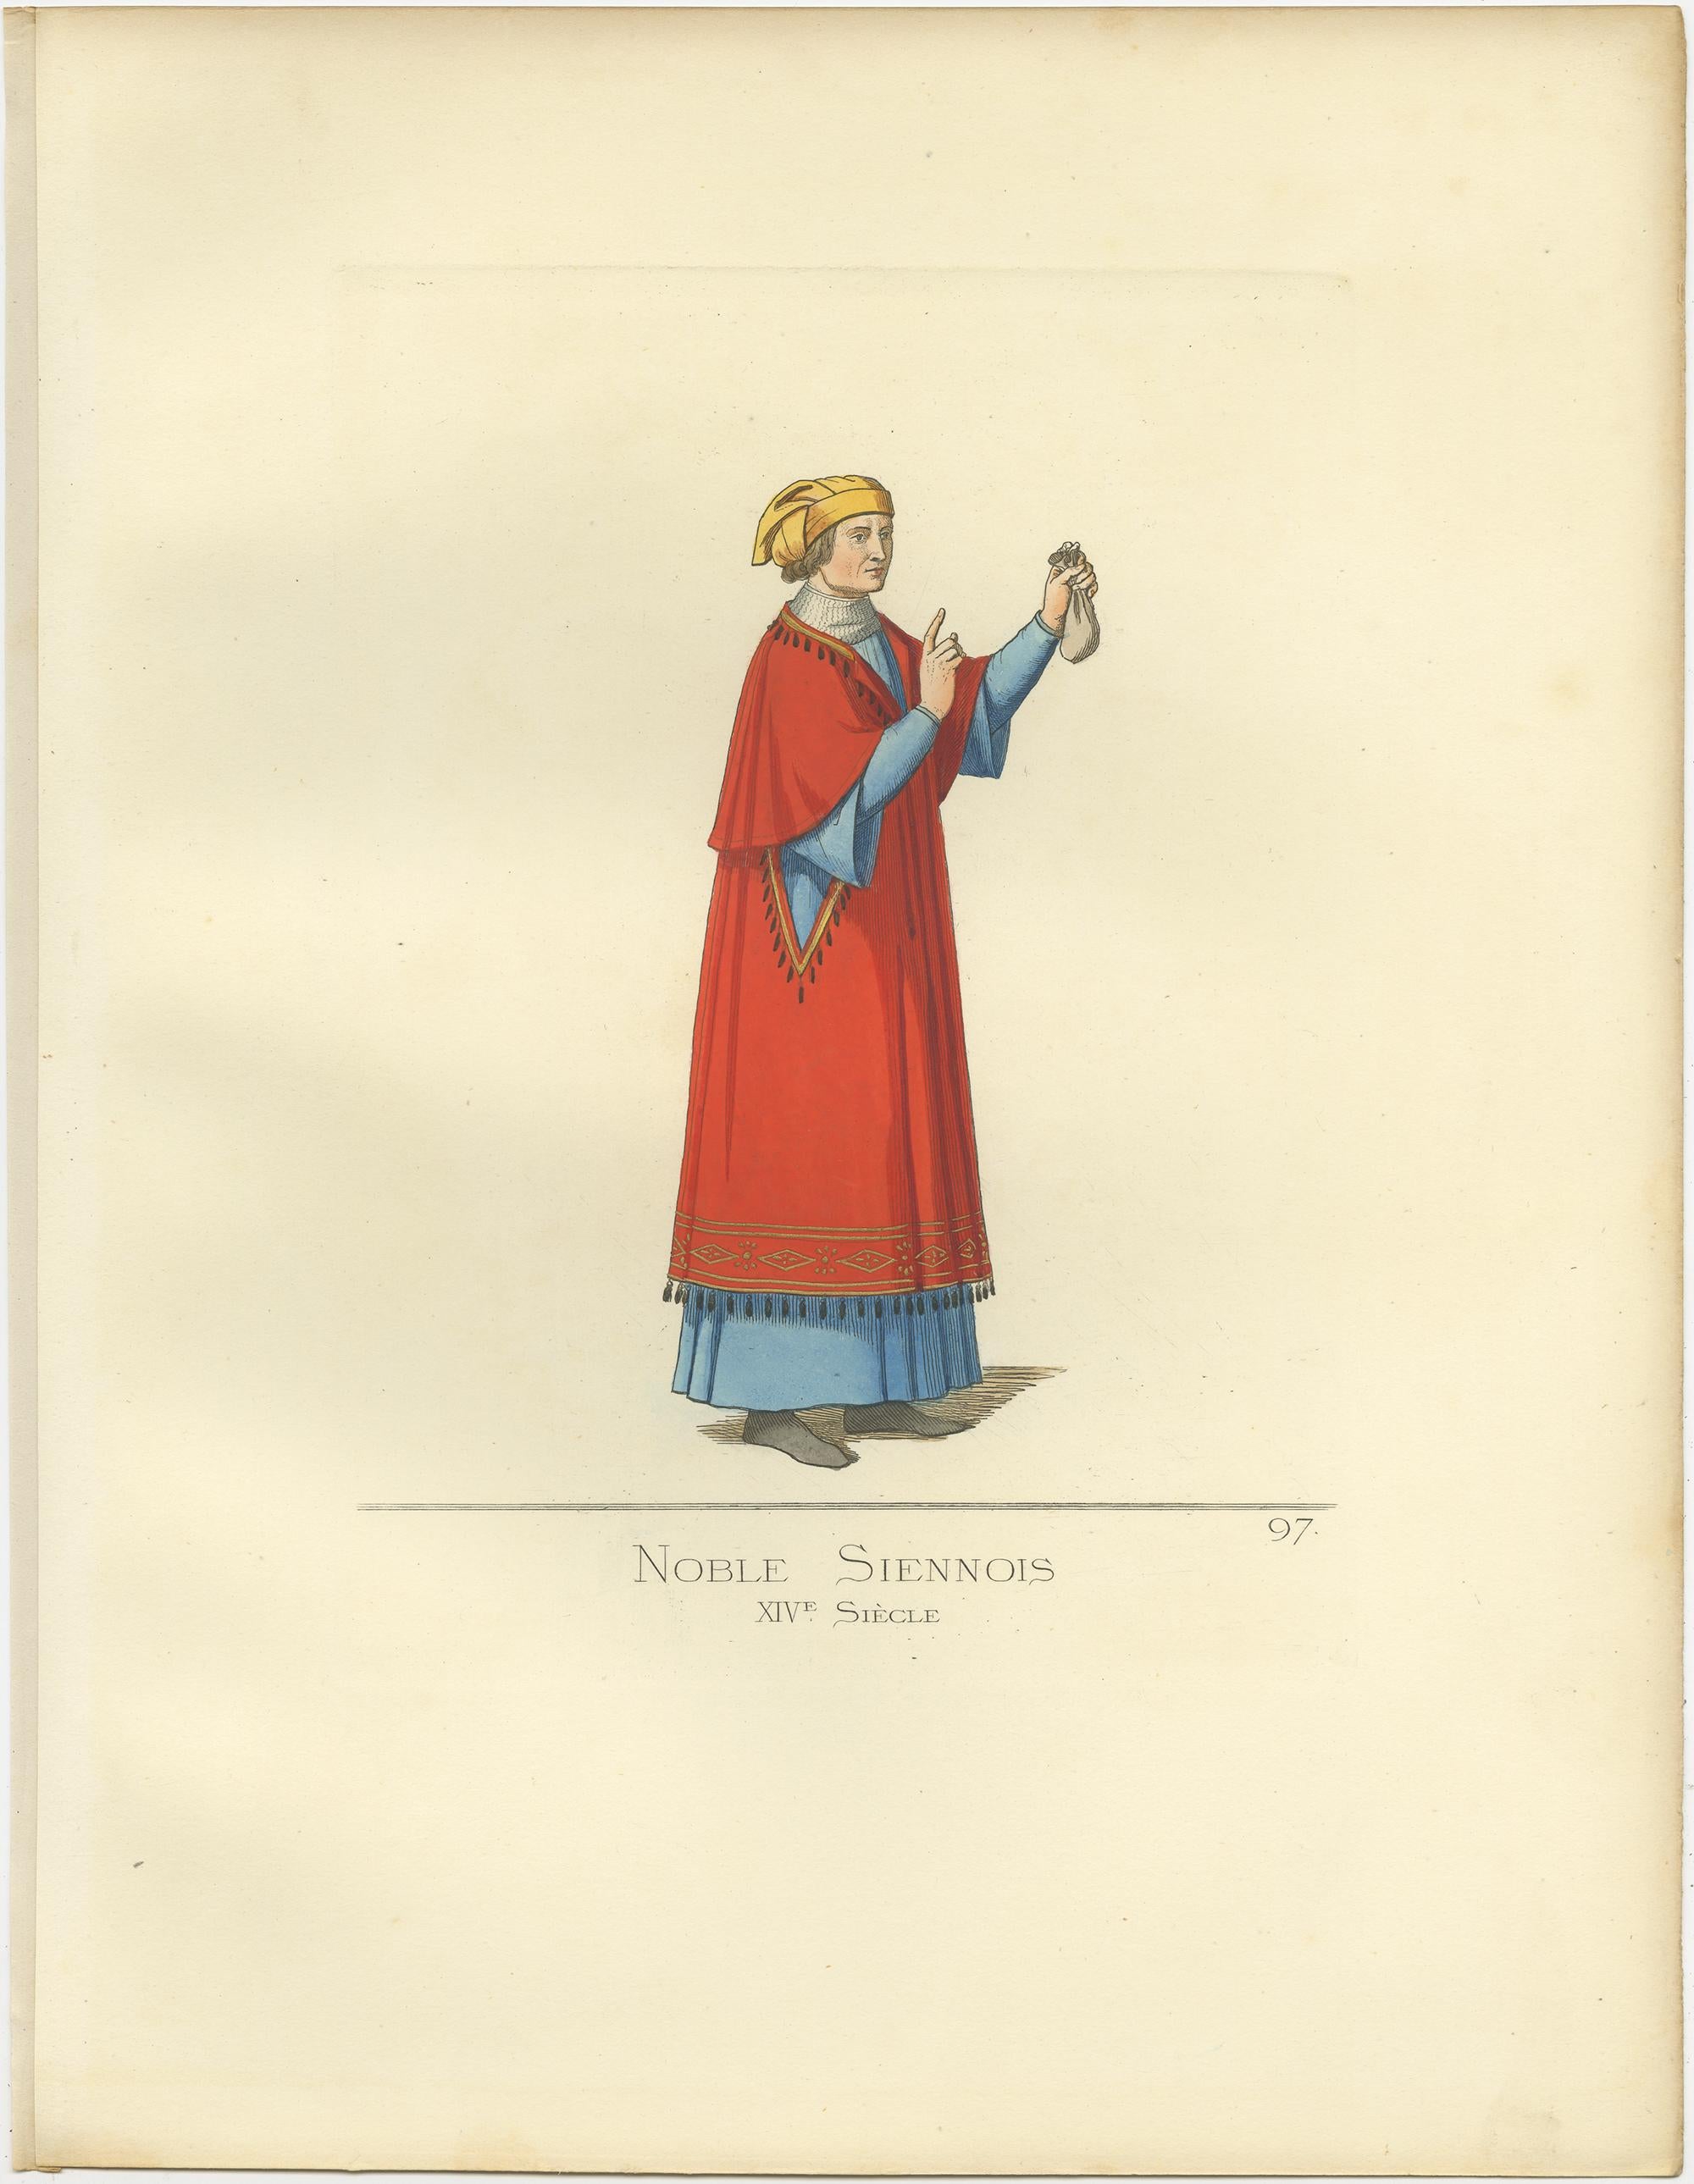 Antique print titled ‘Noble Siennois, XIVe Siecle.’ Original antique print of a nobleman from Siena, Italy, 14th century. This print originates from 'Costumes historiques de femmes du XIII, XIV et XV siècle' by C. Bonnard. Published, 1860.